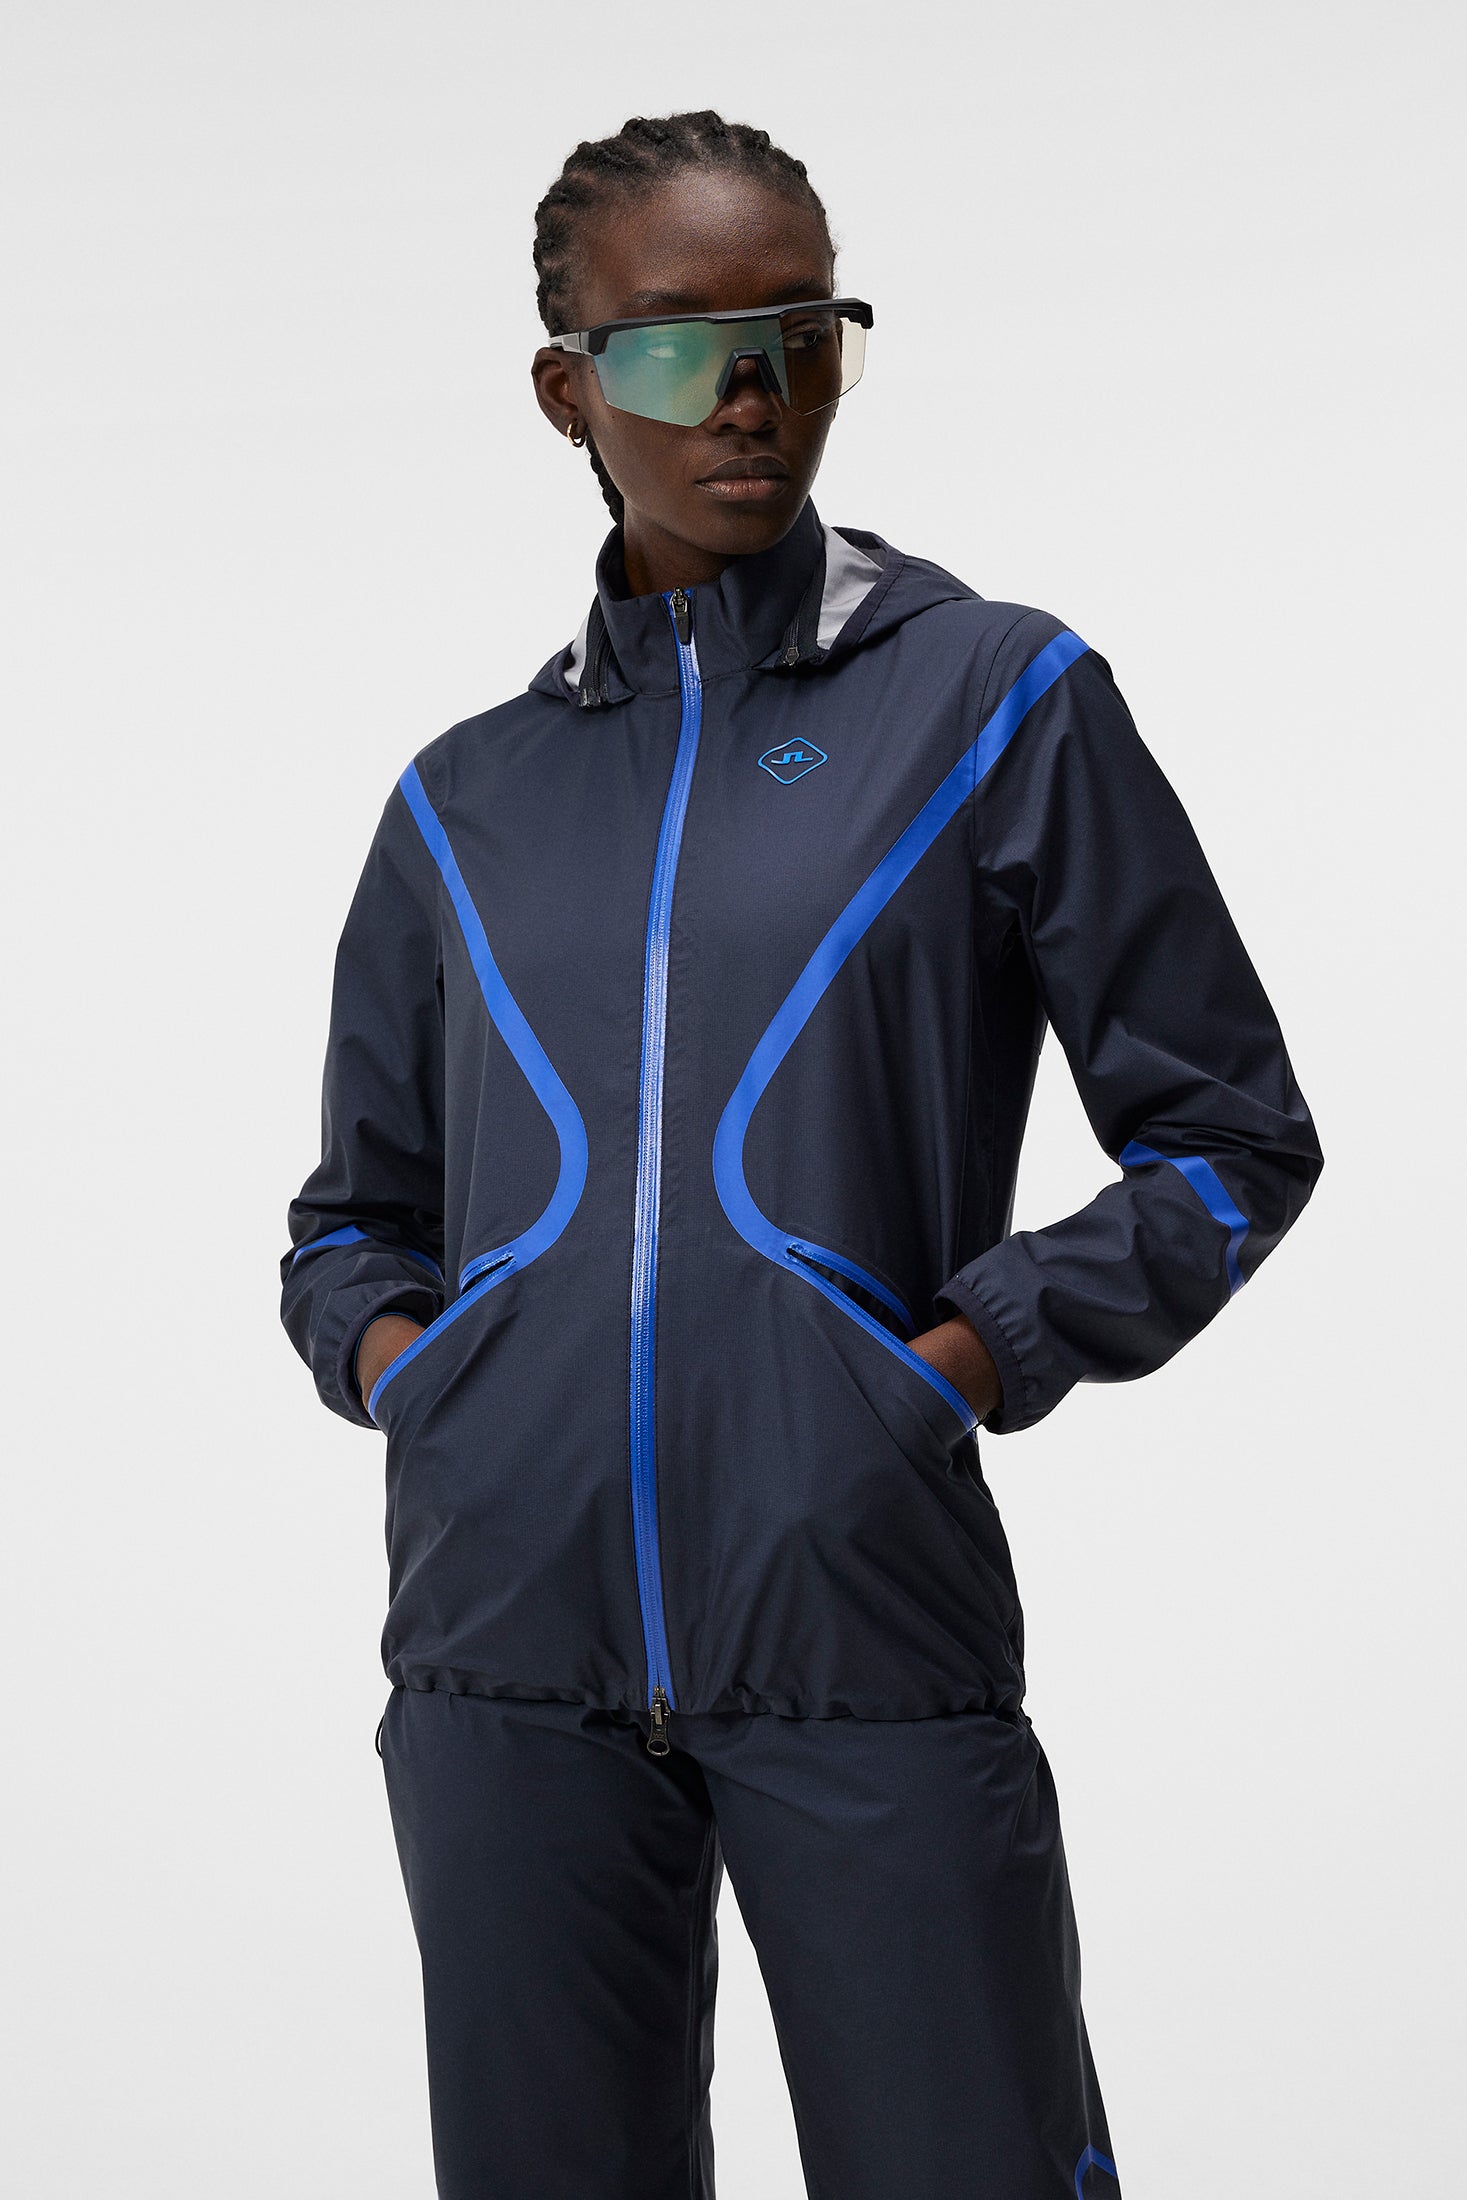 Women's Outdoor Collection - J.Lindeberg